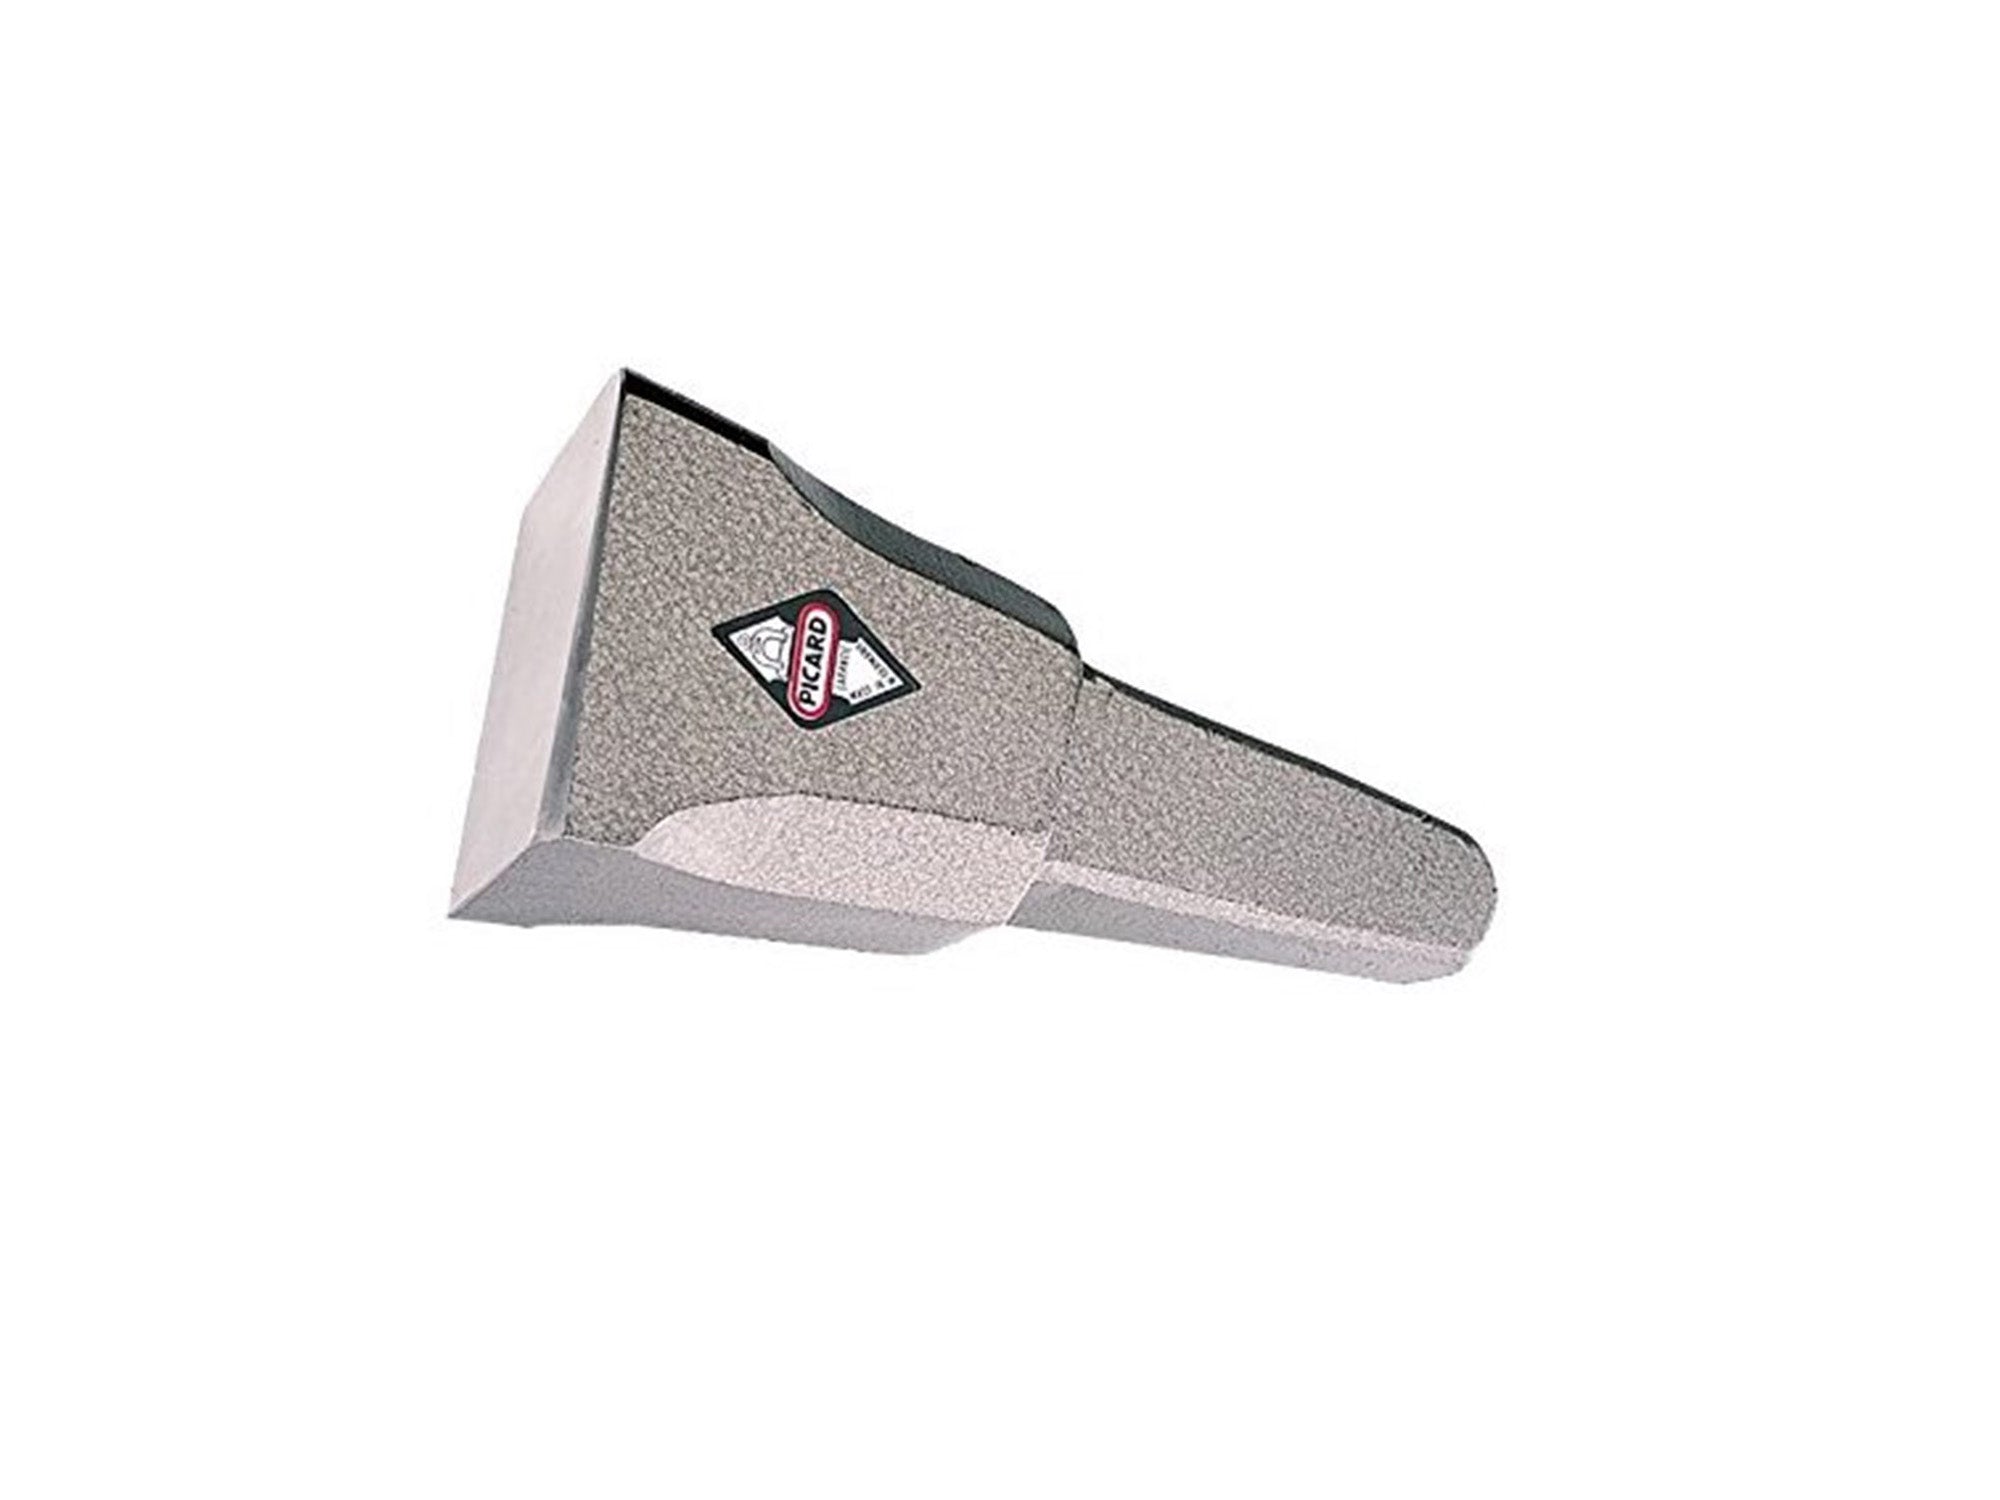 Tinsmiths Square Flat Face Curved Edge & Round Corner Anvil 0014120 - Blacksmith Source Tool Company 